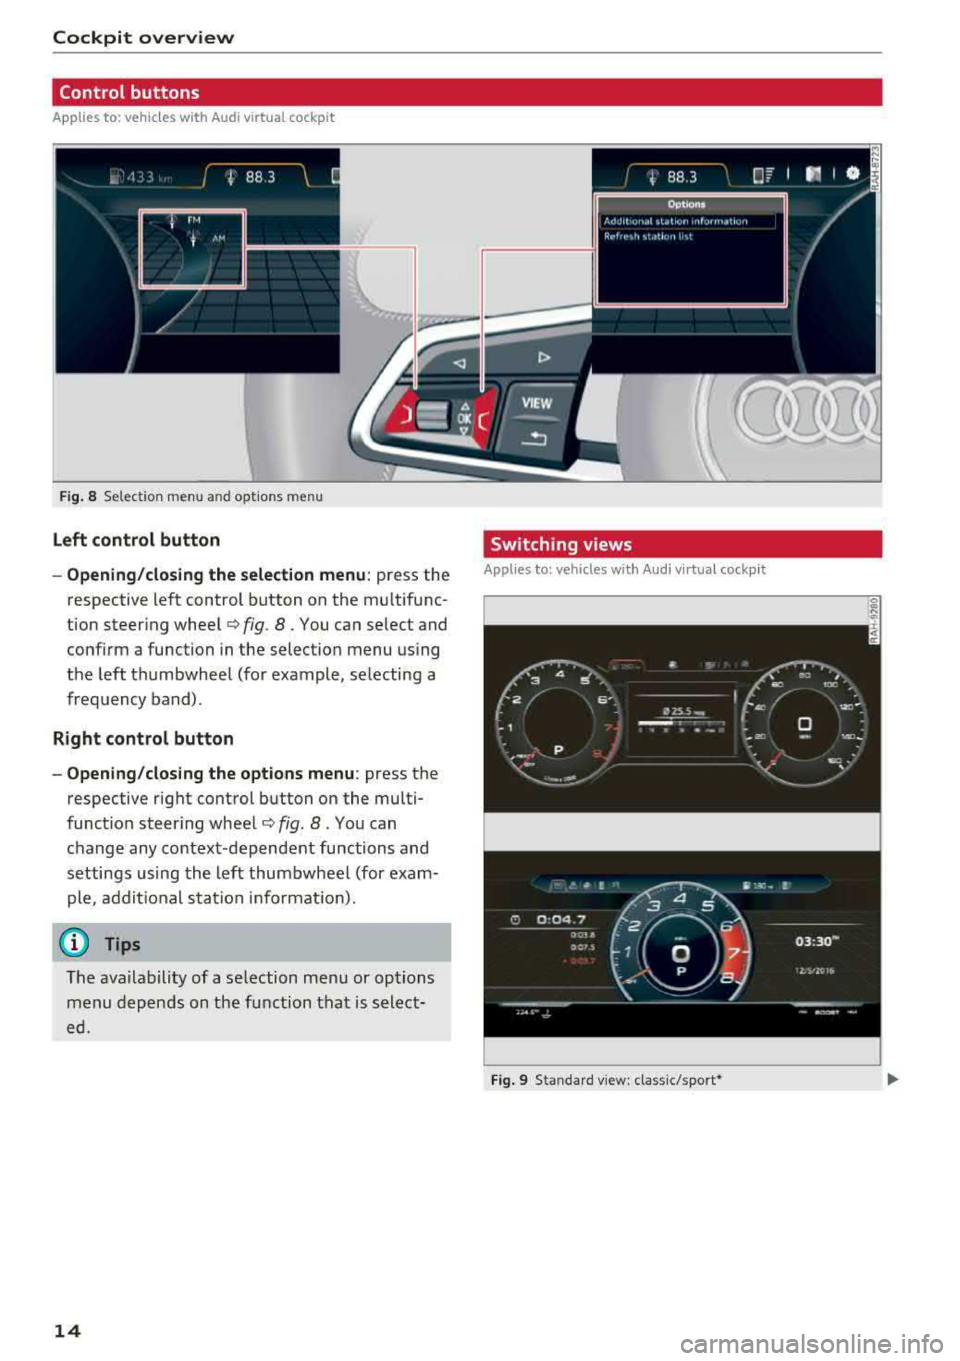 AUDI S3 SEDAN 2018  Owners Manual Cockpit  overview 
Control  buttons 
Applies  to:  vehicles with  Audi v irtual  cockp it 
i rM 
 j M .., 
Fig . 8  Select ion  menu  and optio ns  m en u 
Left  control  button 
- Opening/closing th